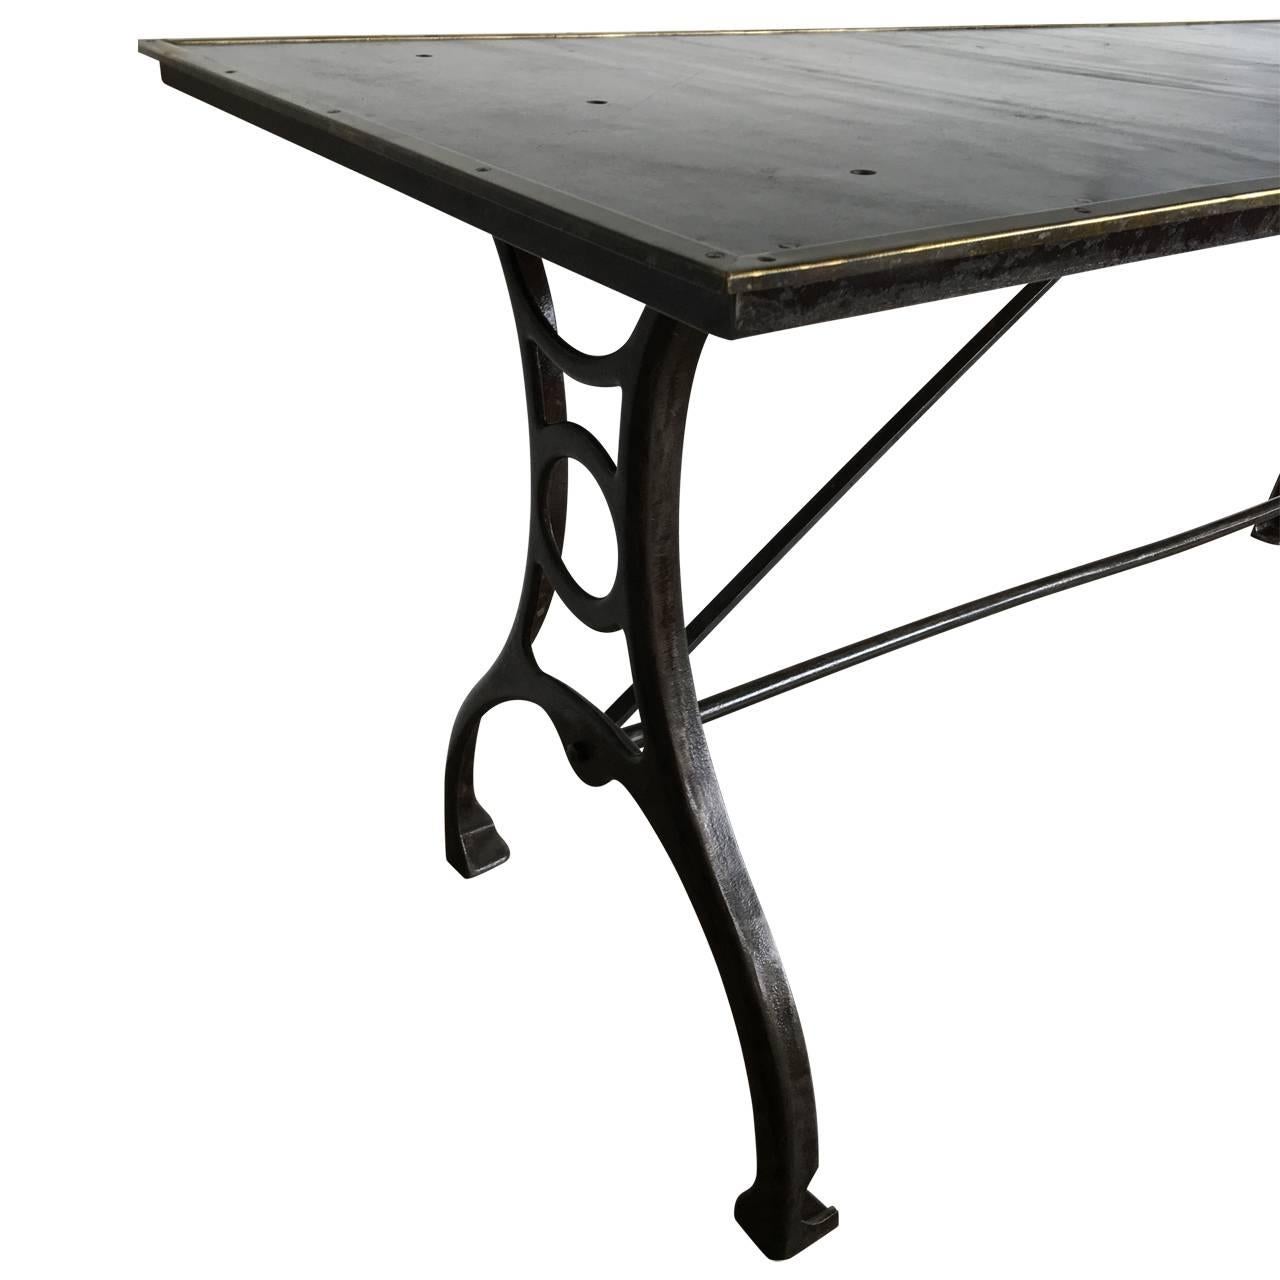 Early Industrial Table From The National Geographic Society 2